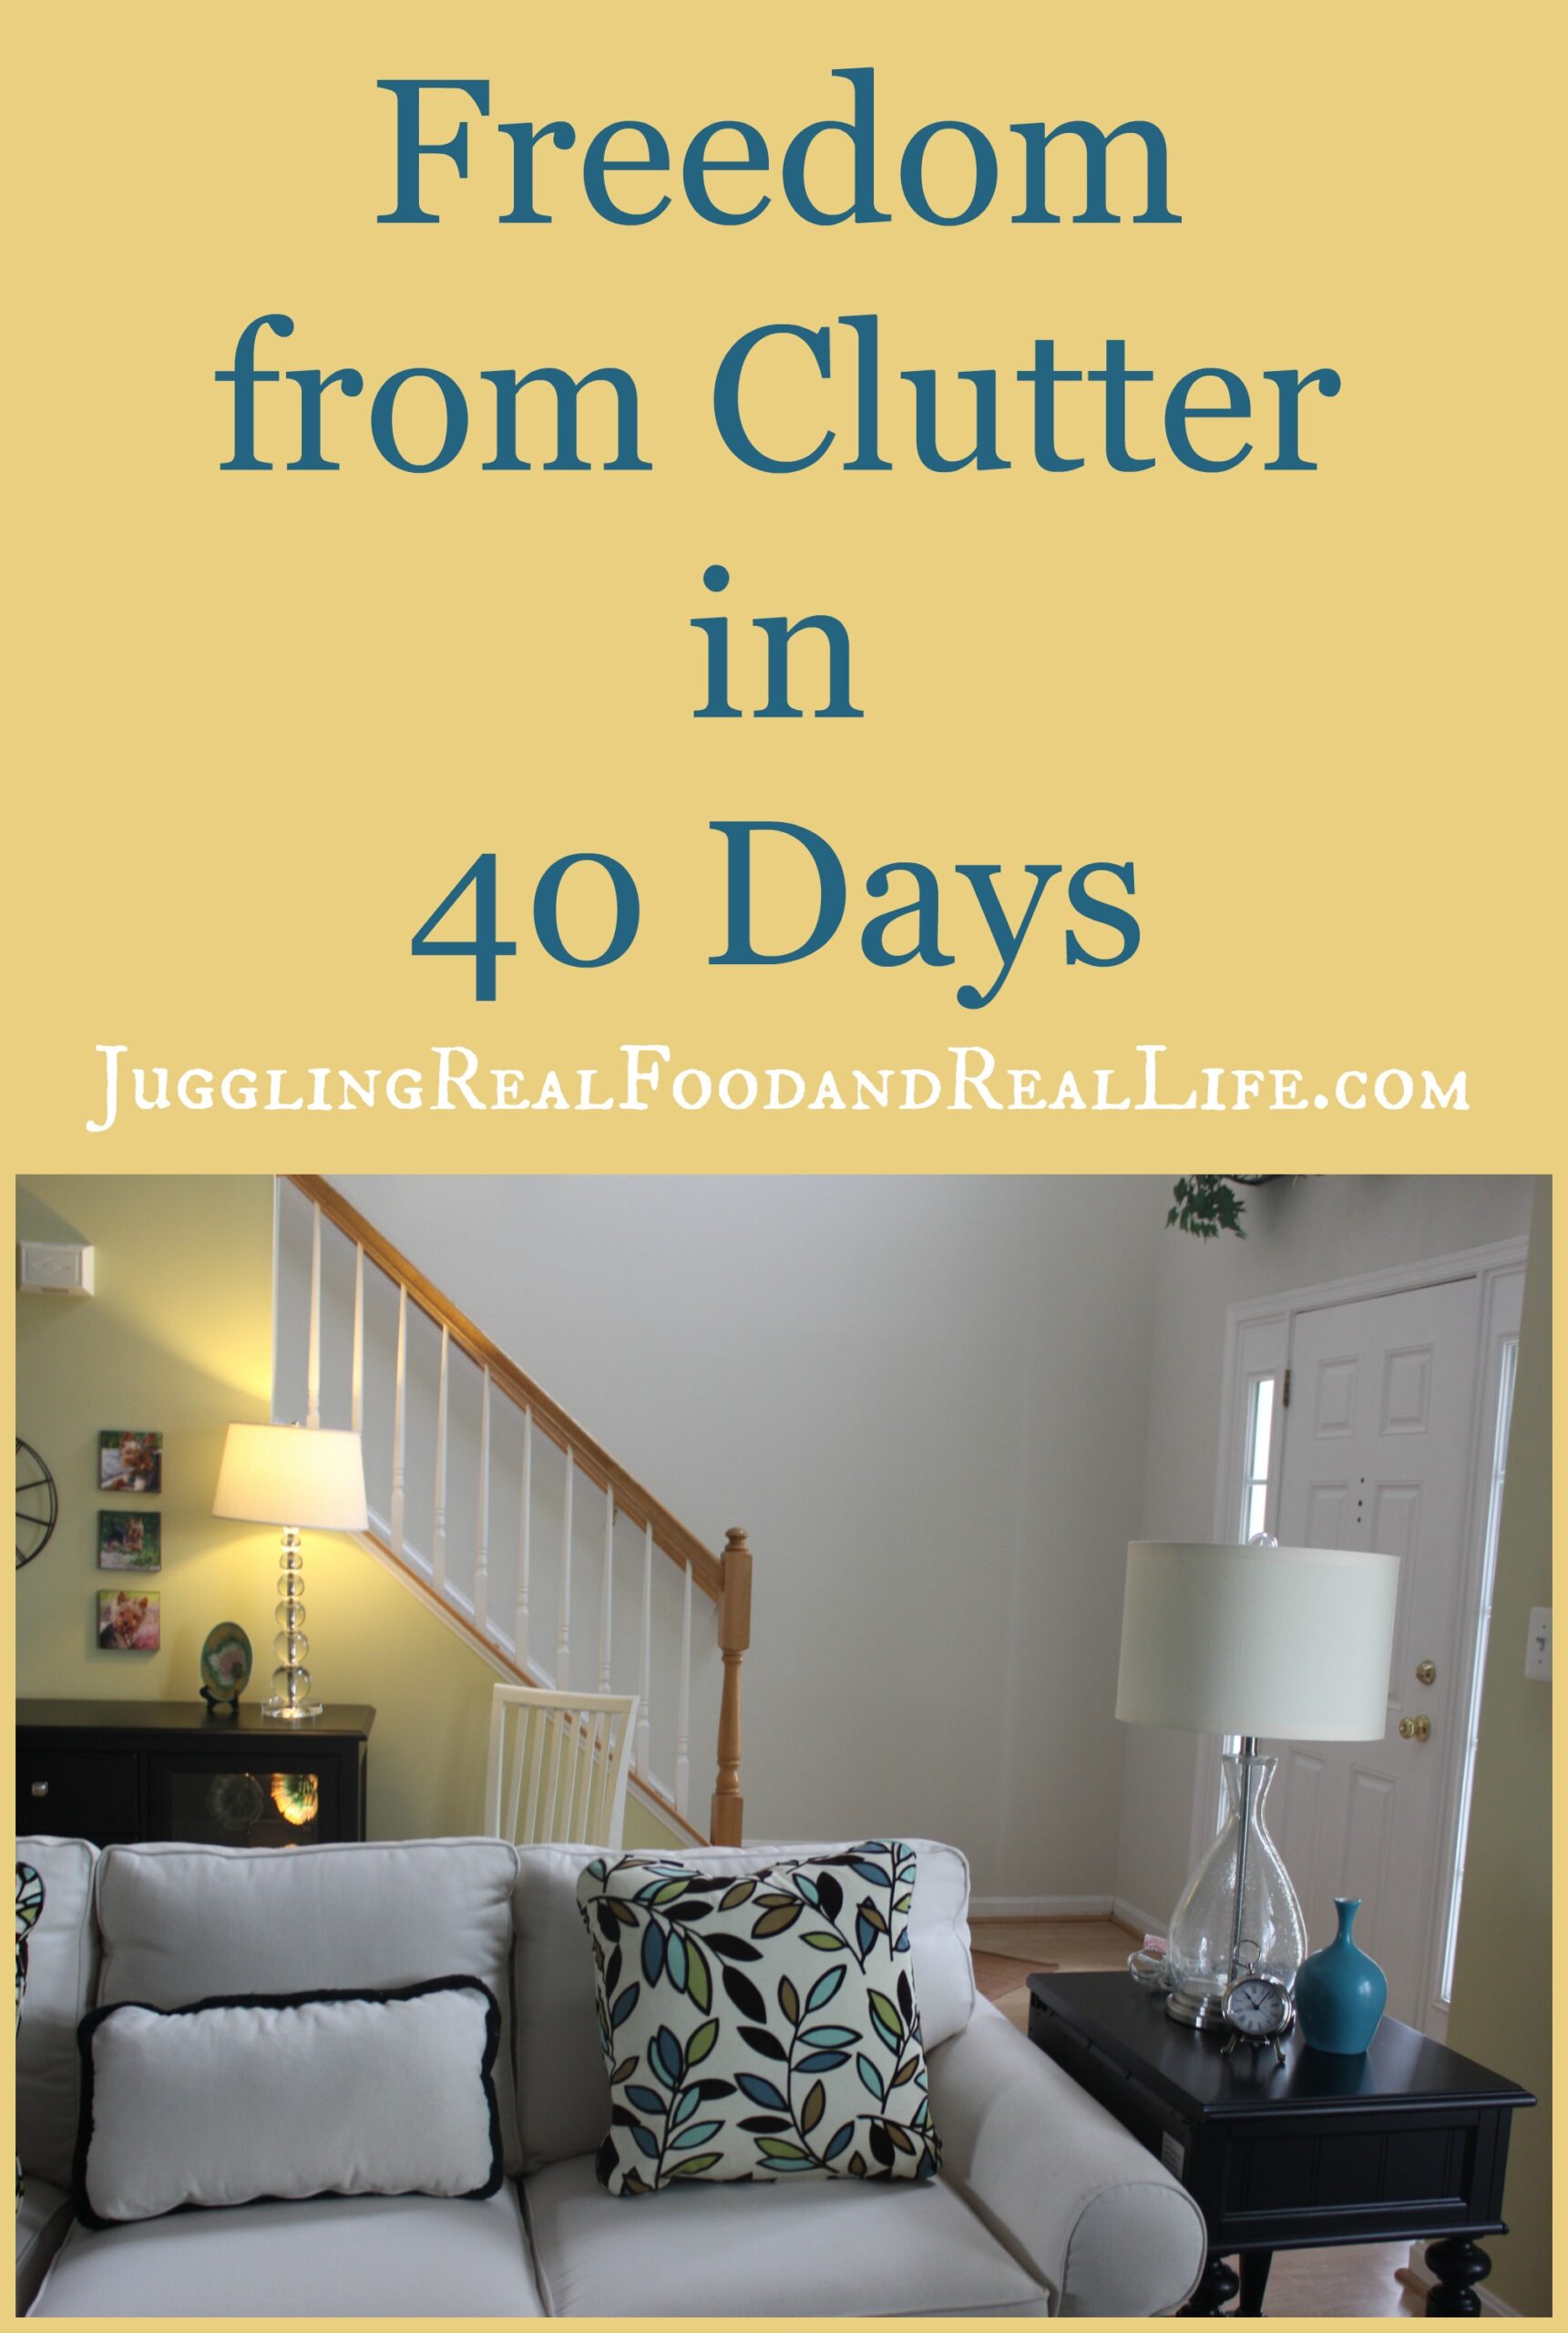 Freedom from Clutter